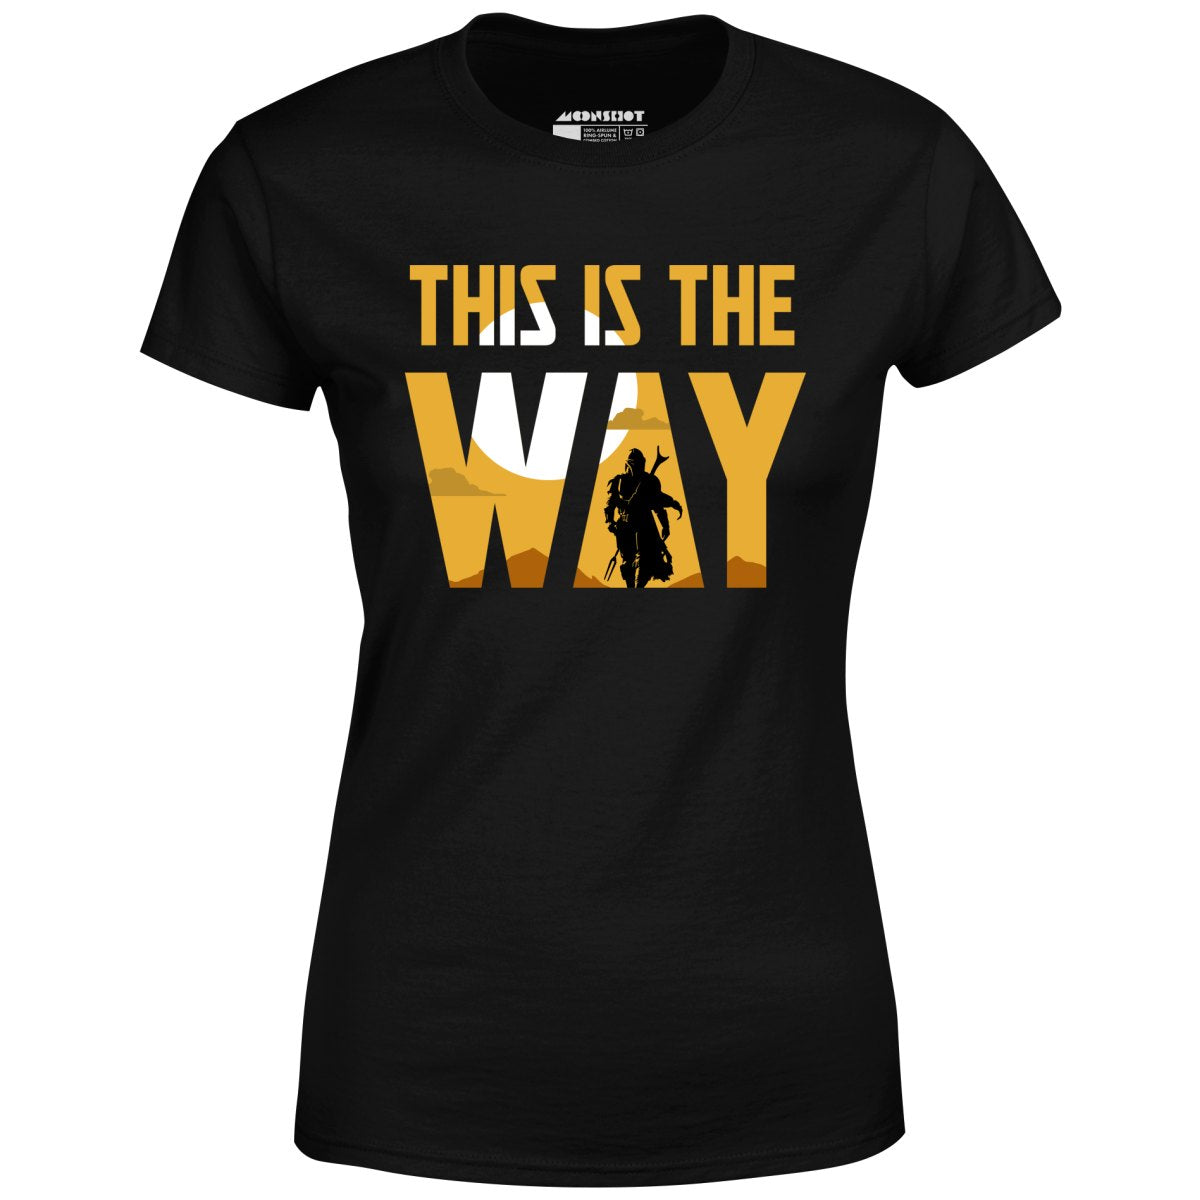 This is The Way - Women's T-Shirt